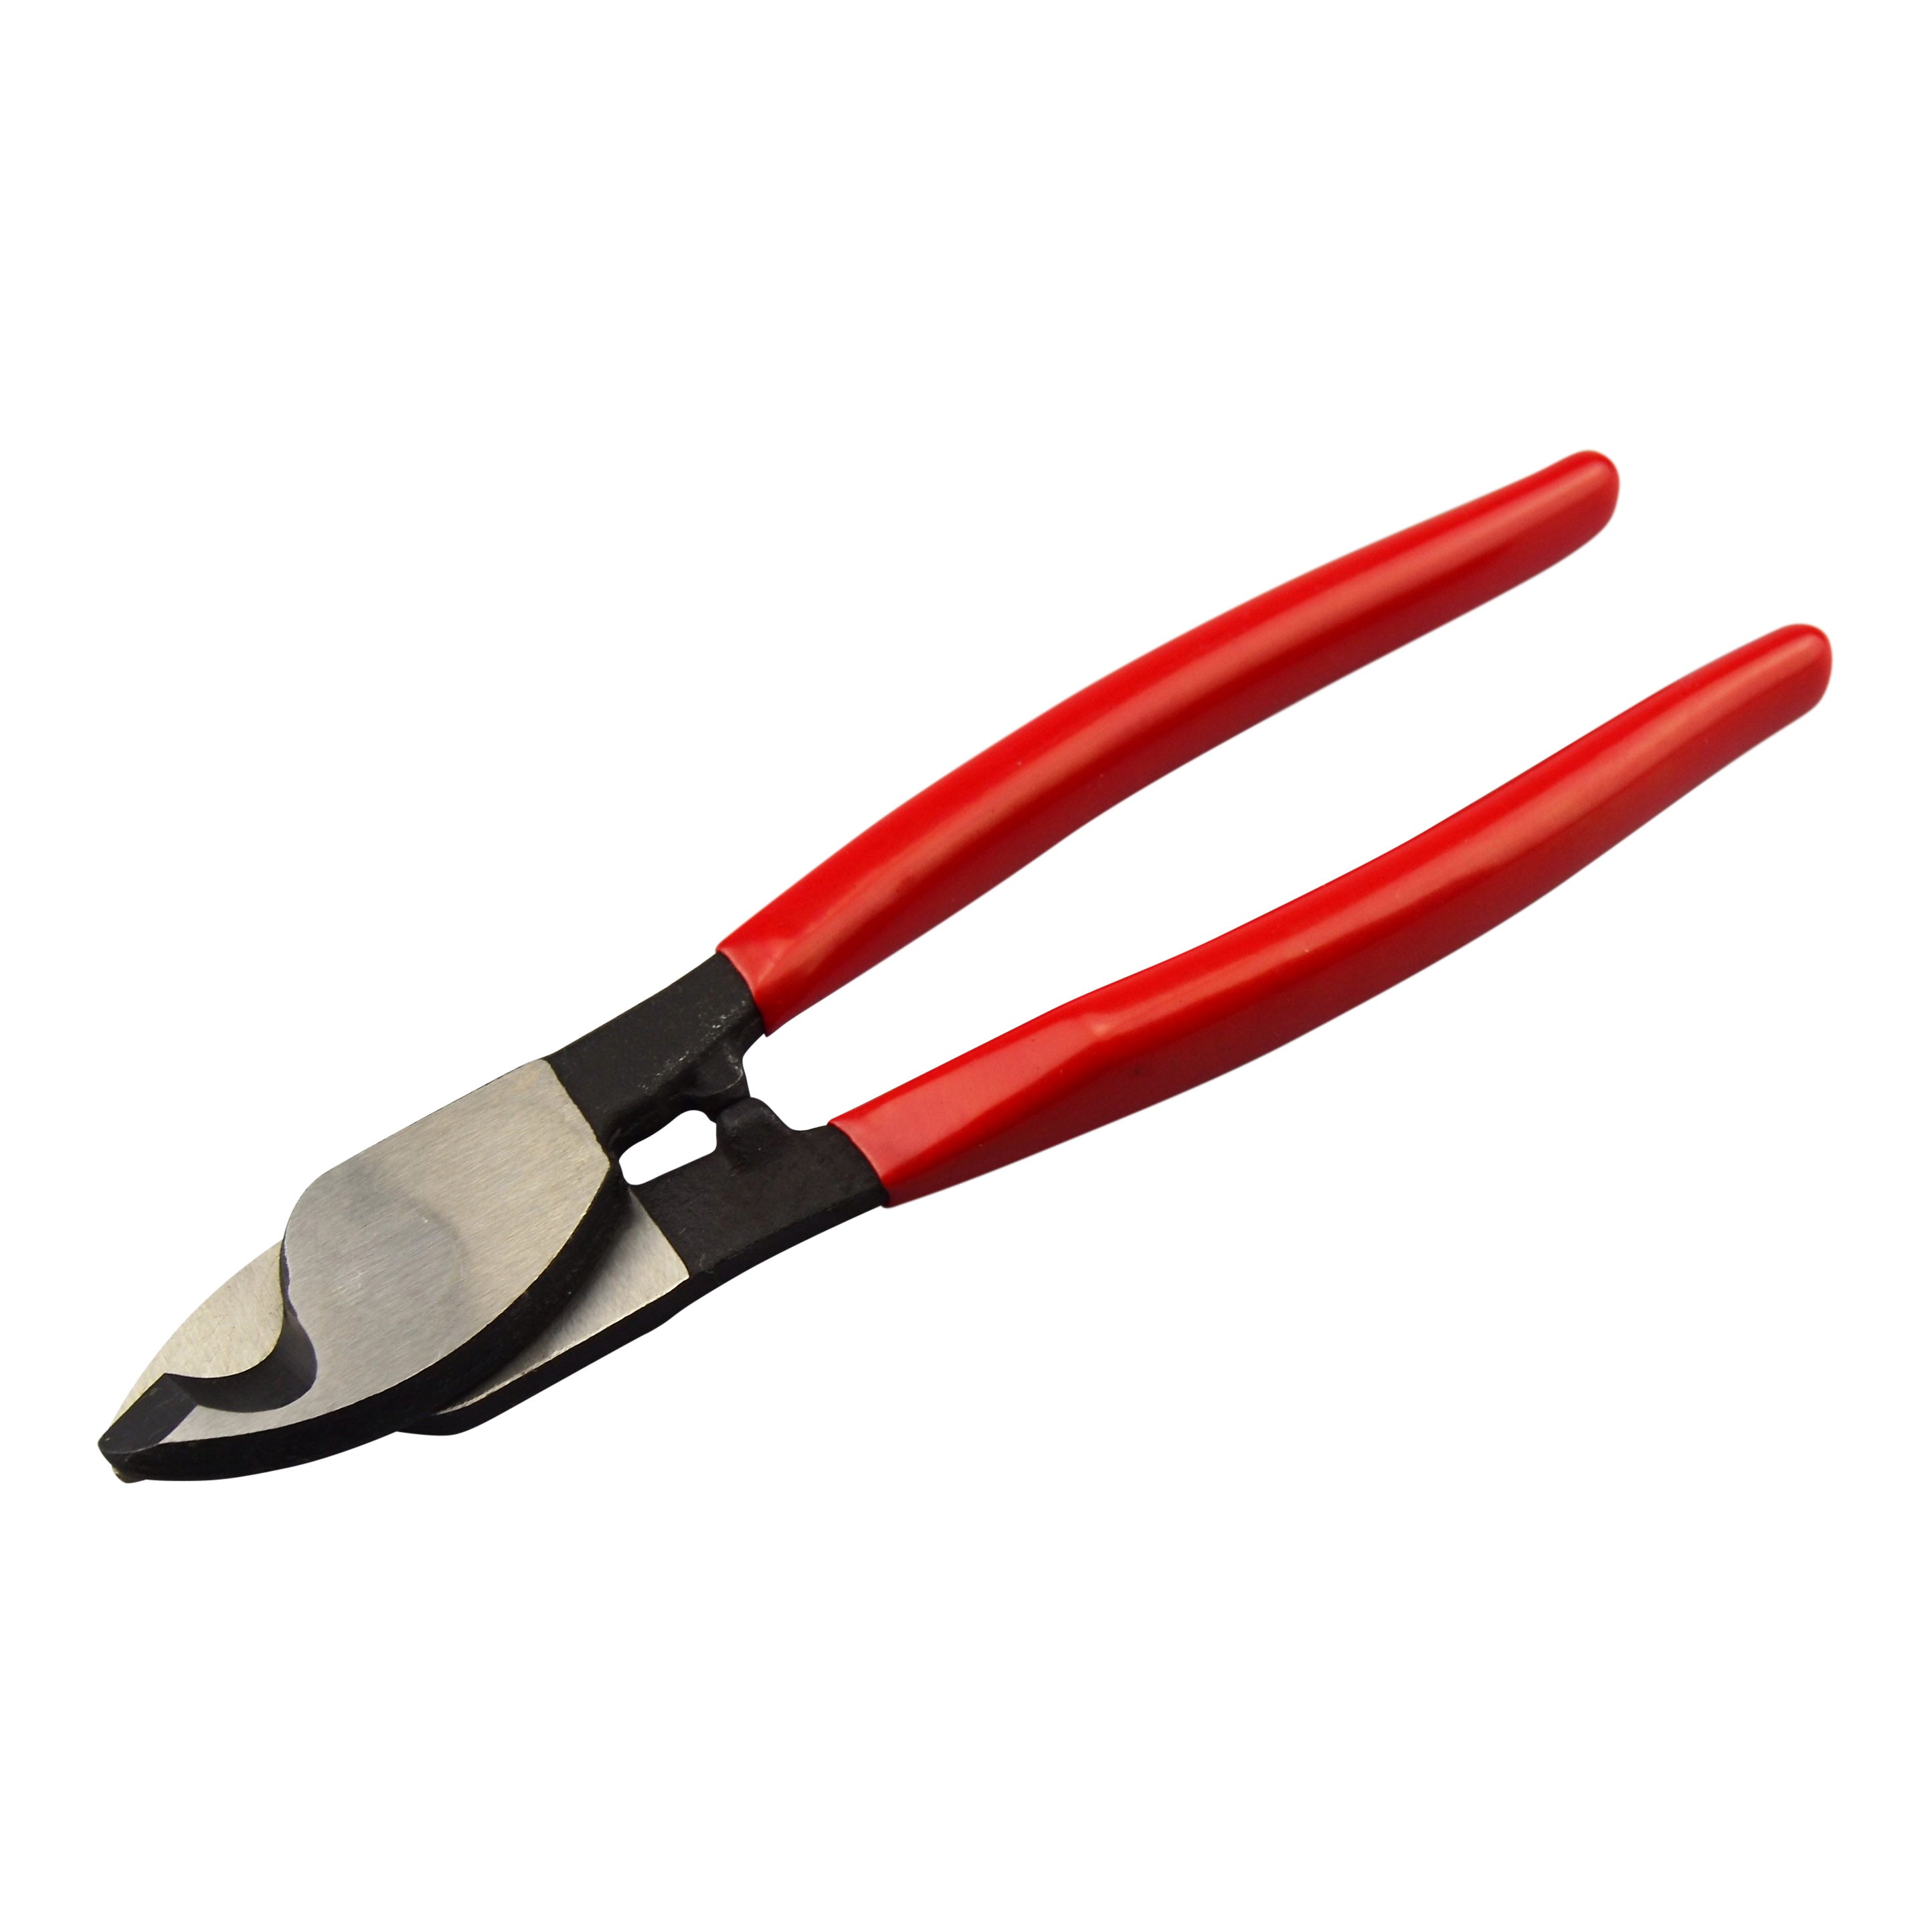 Cable Cutter for Cables up to 38mm²